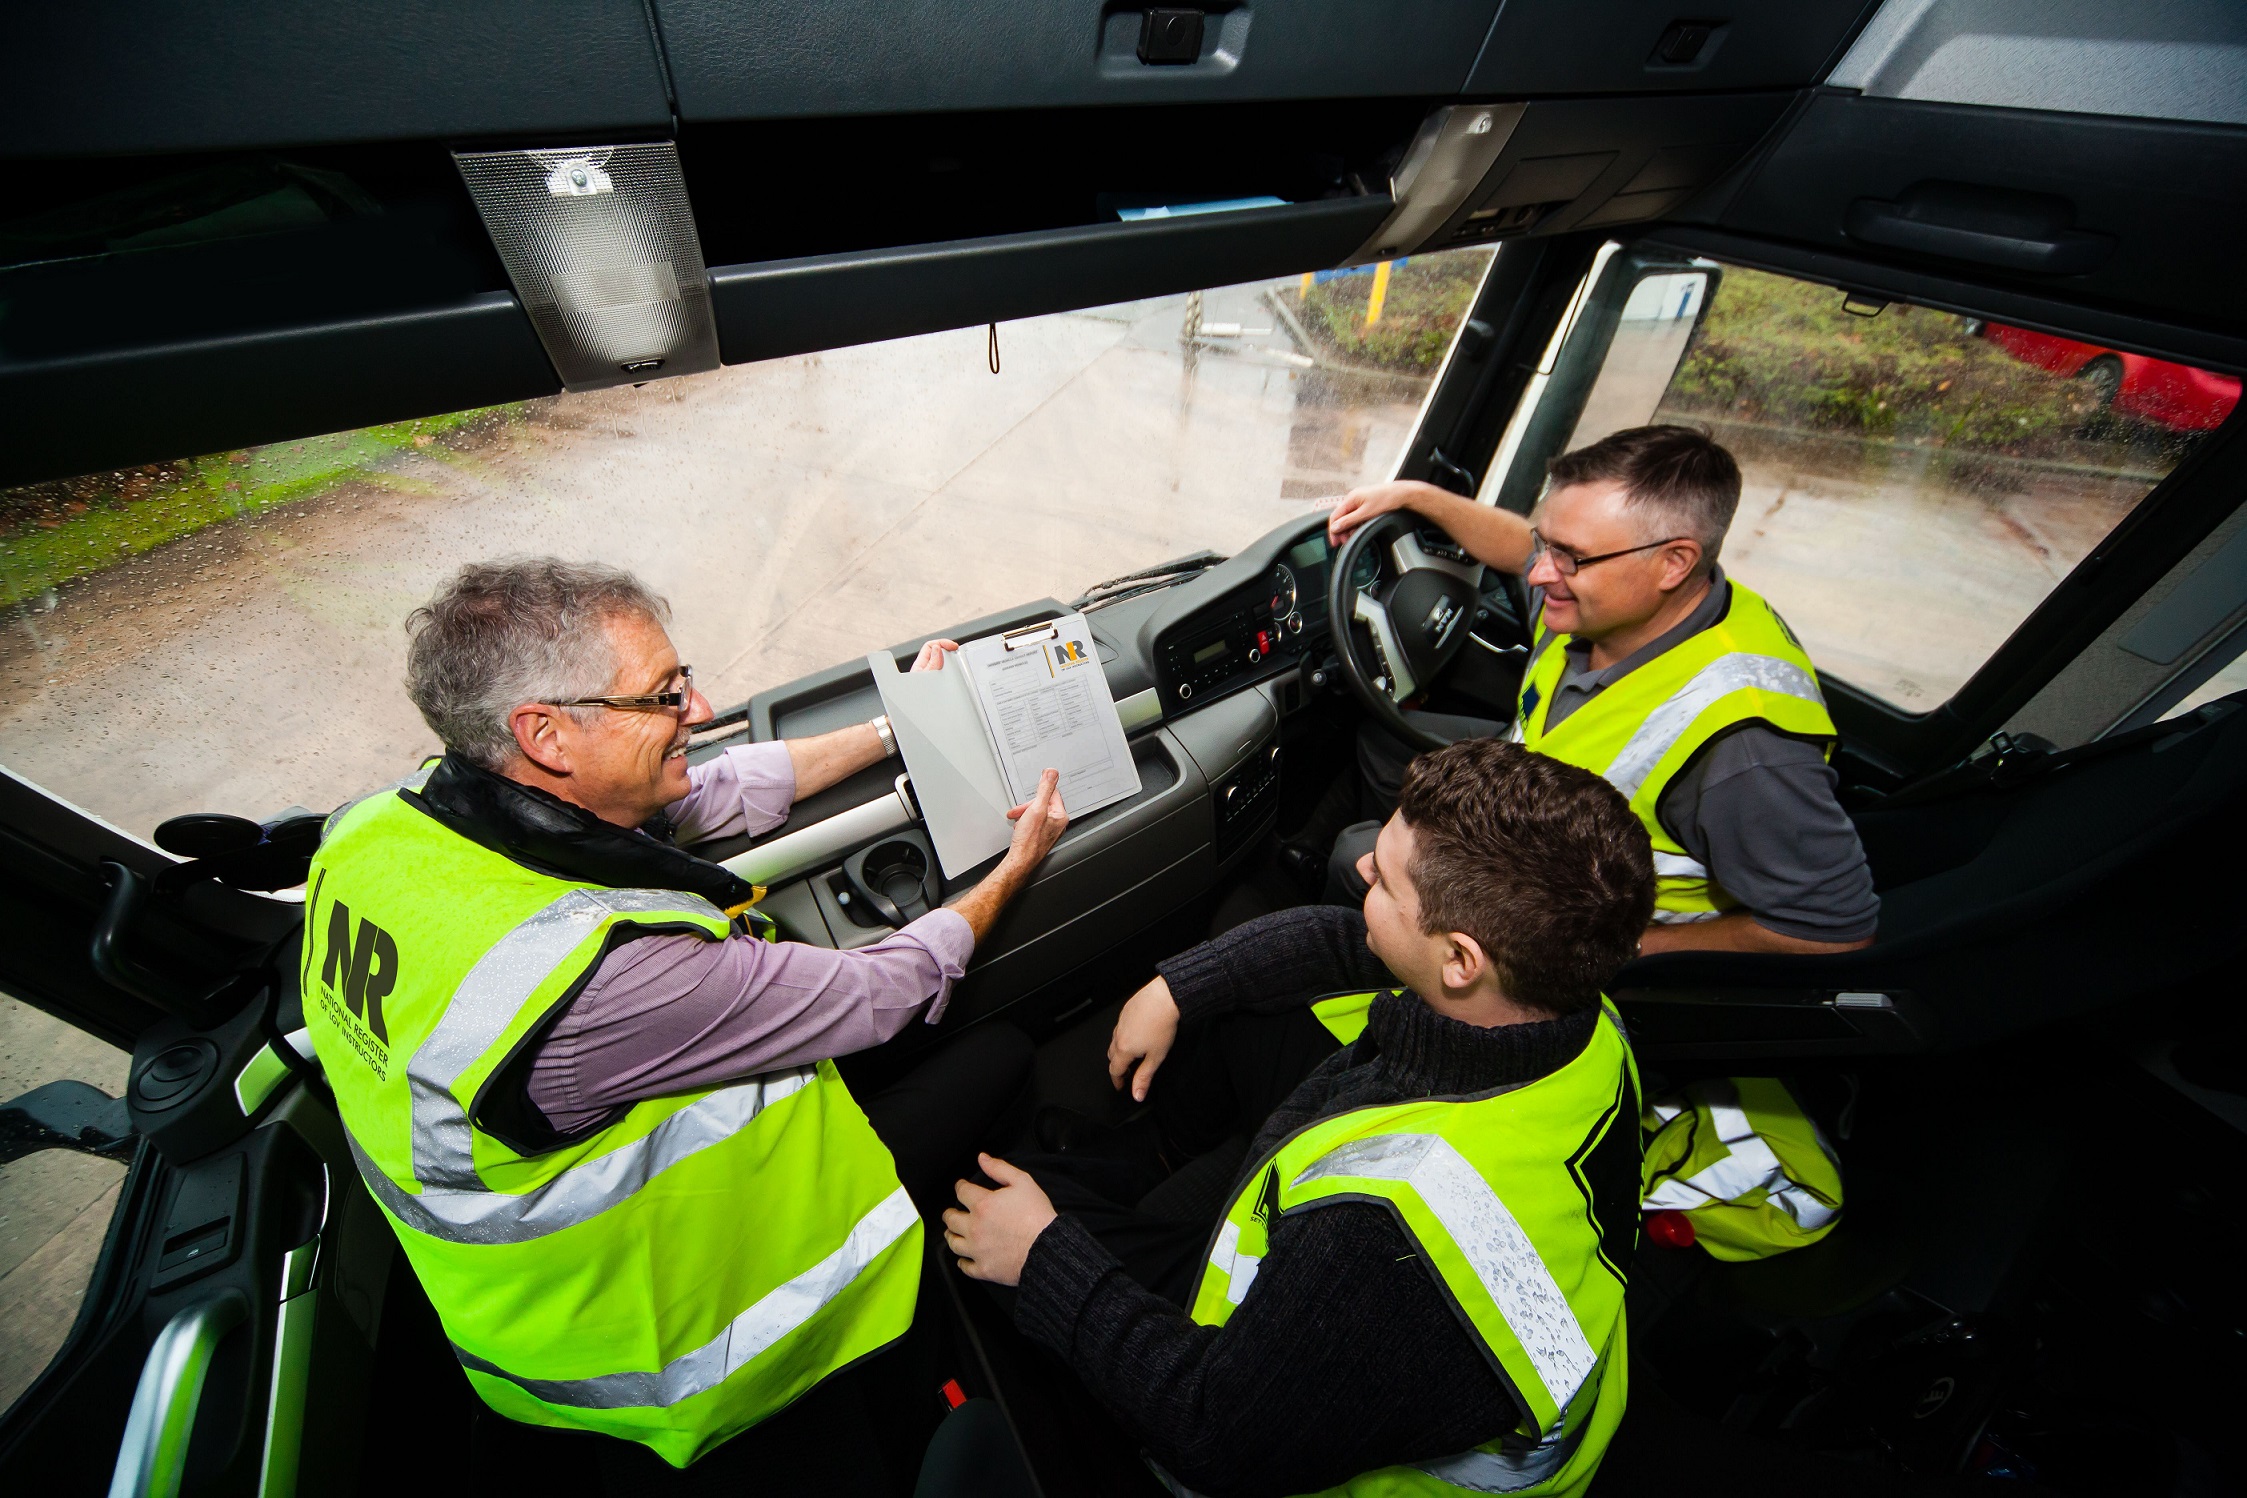 Successful First Year for National Register of LGV Instructors